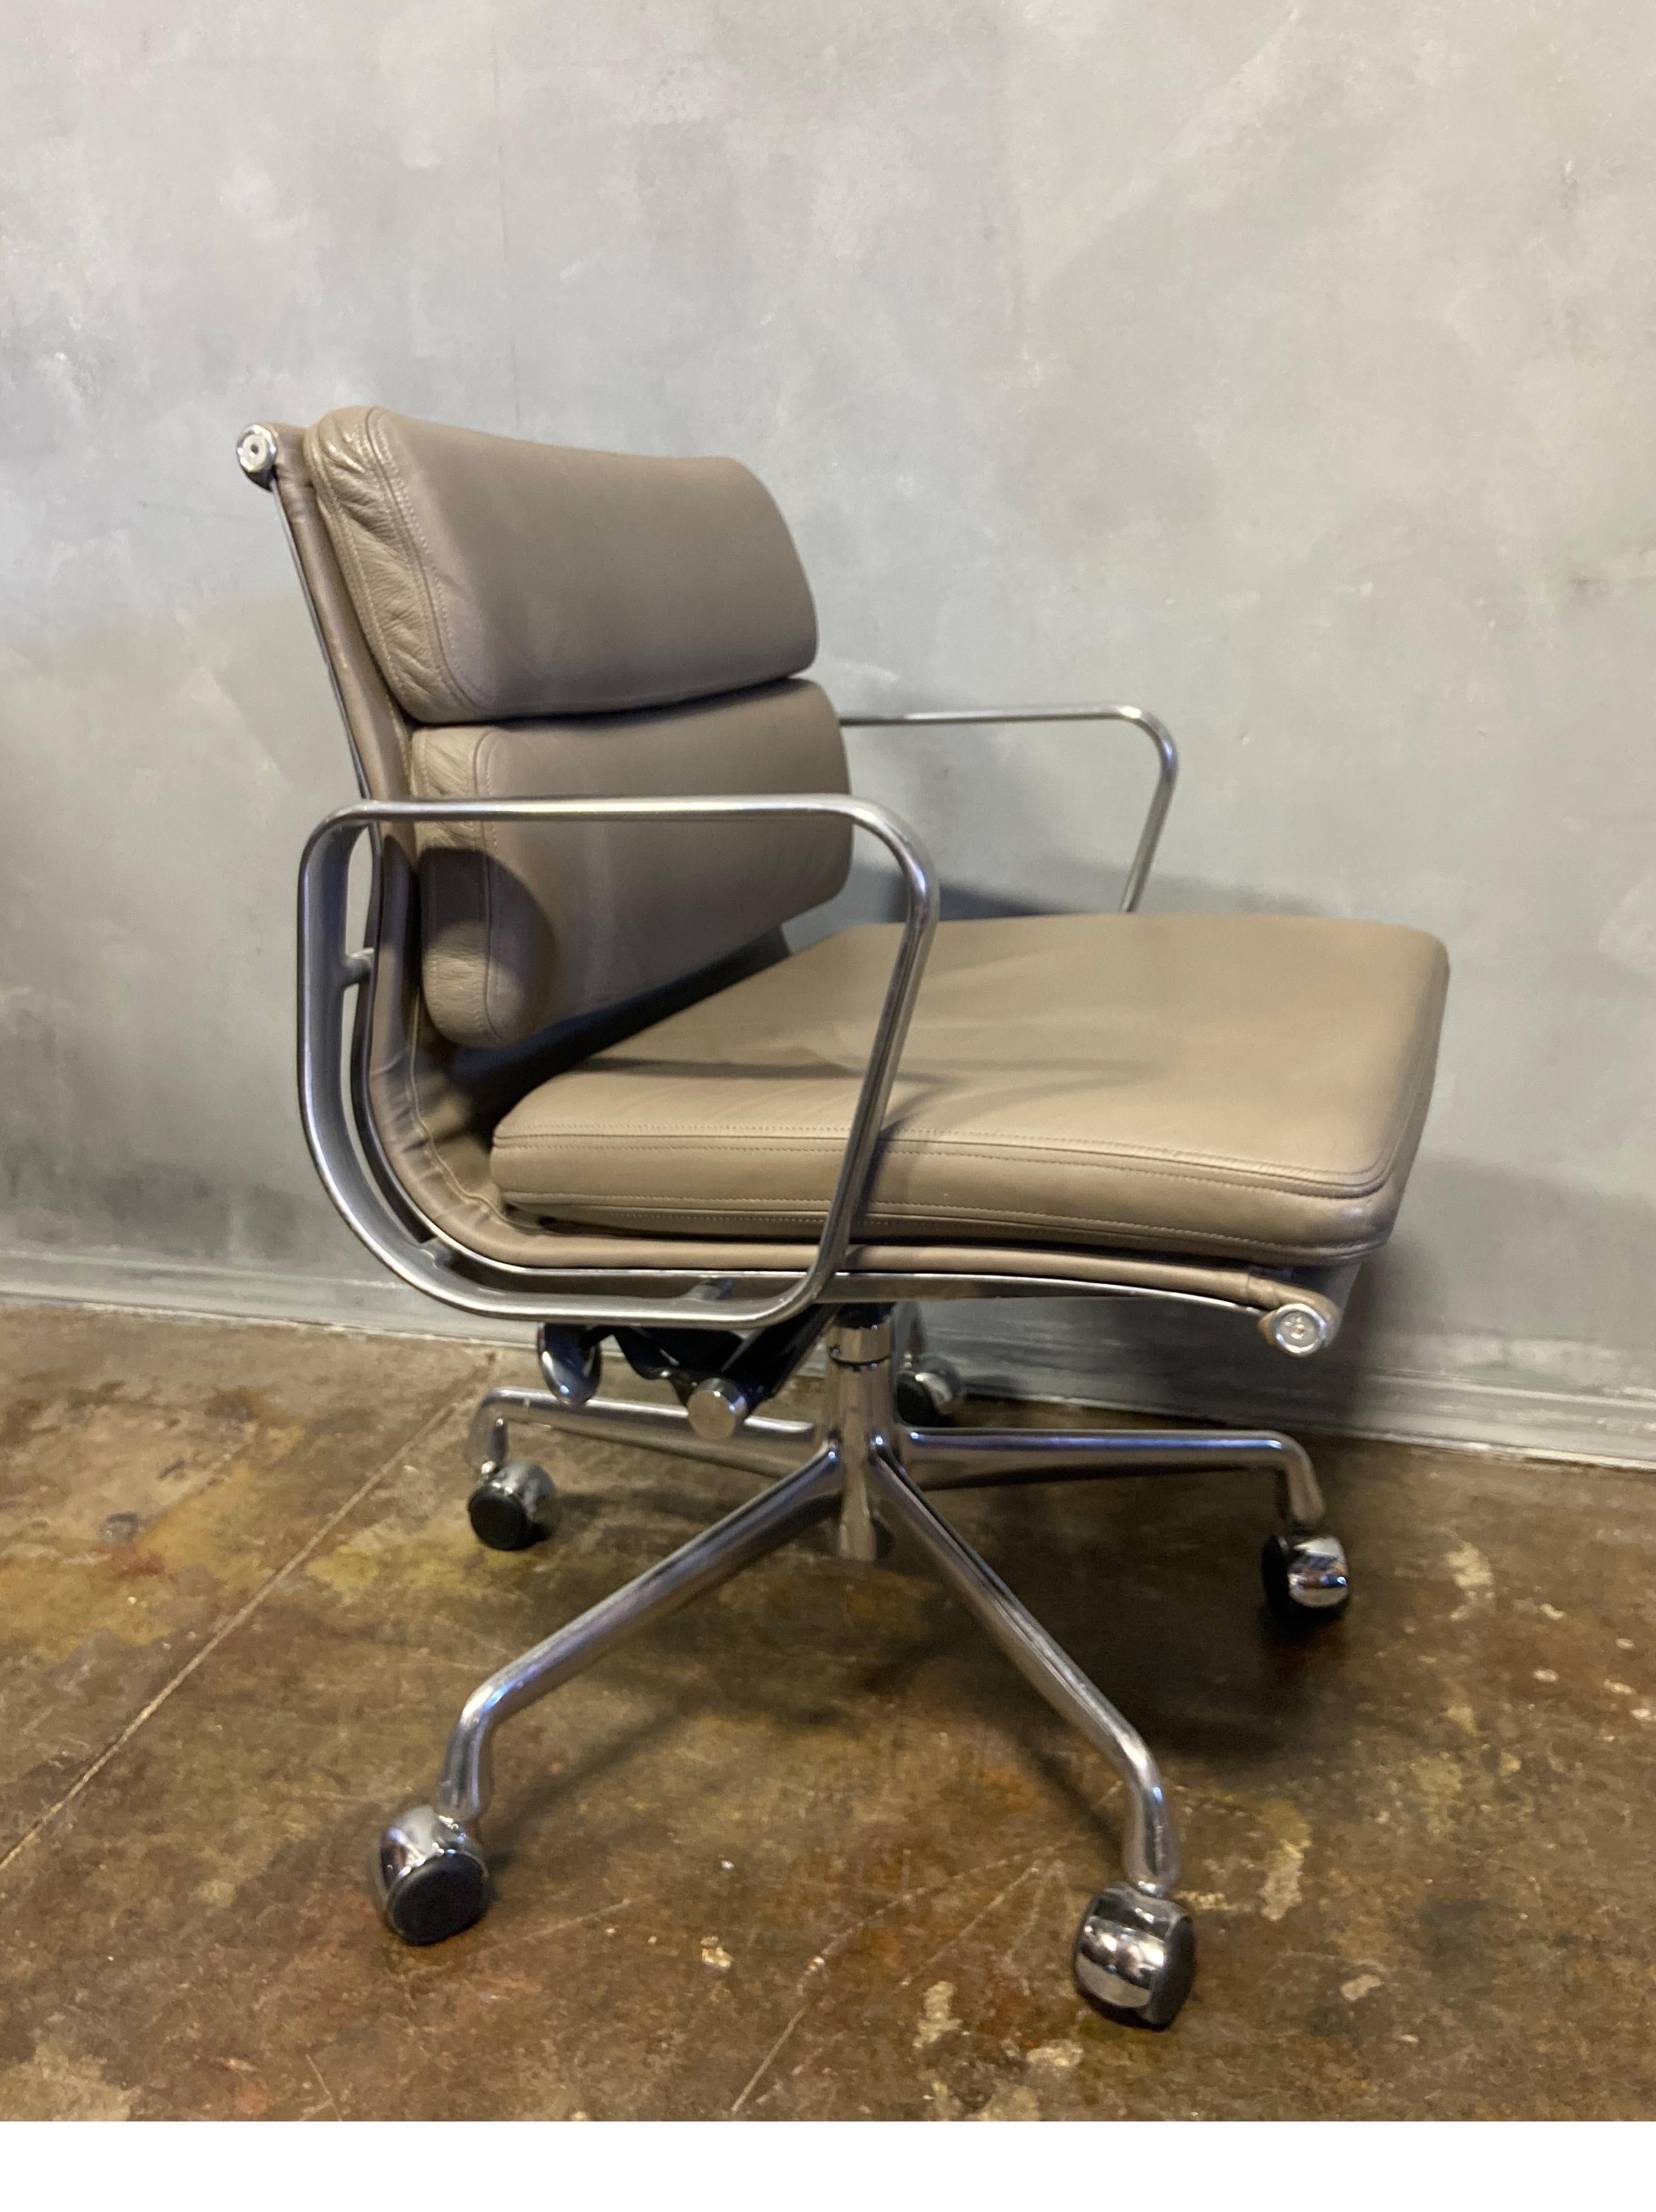 For your consideration is this authentic Eames for Herman Miller vintage soft pad chairs in Gunmetal Grey leather. Adjustable tilt and height on a 5 star base. These authentic vintage examples are icons of Mid-Century Modern design. These chairs are